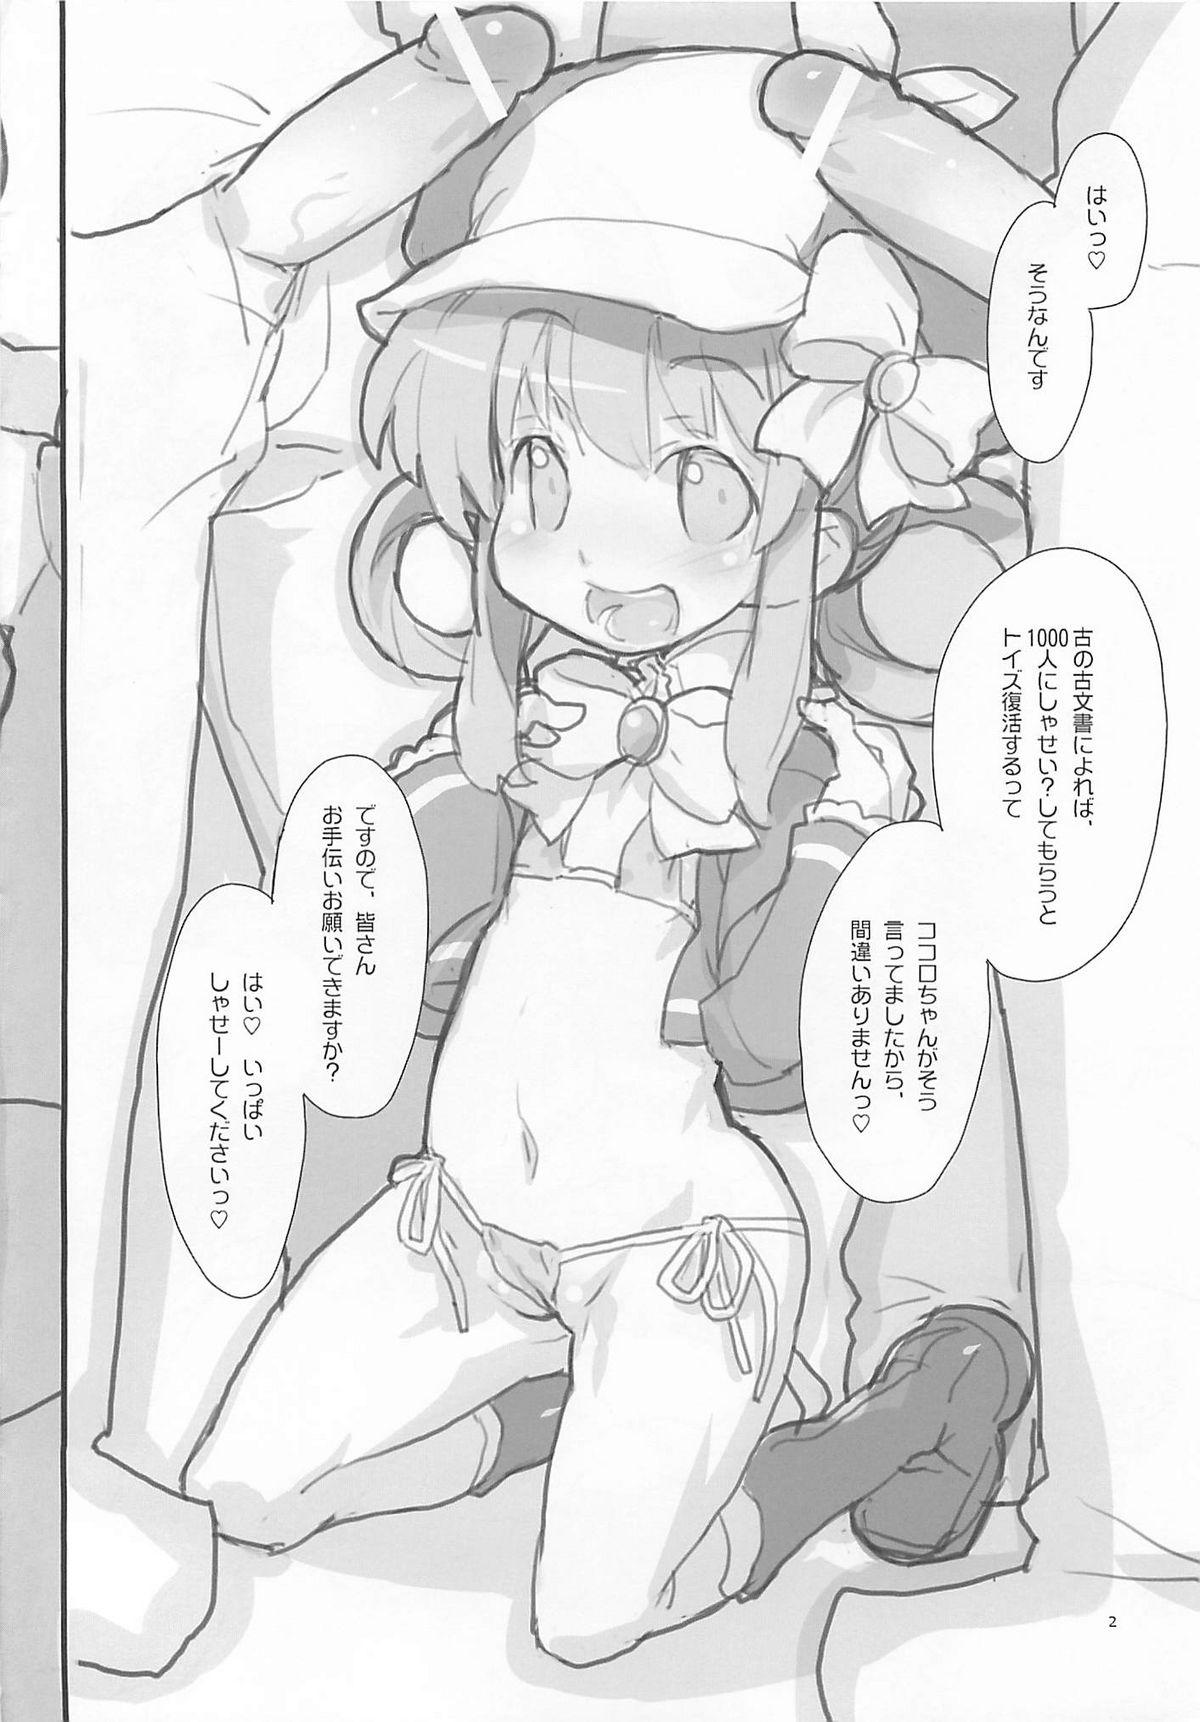 Harcore milky holes - Tantei opera milky holmes Hand Job - Page 3